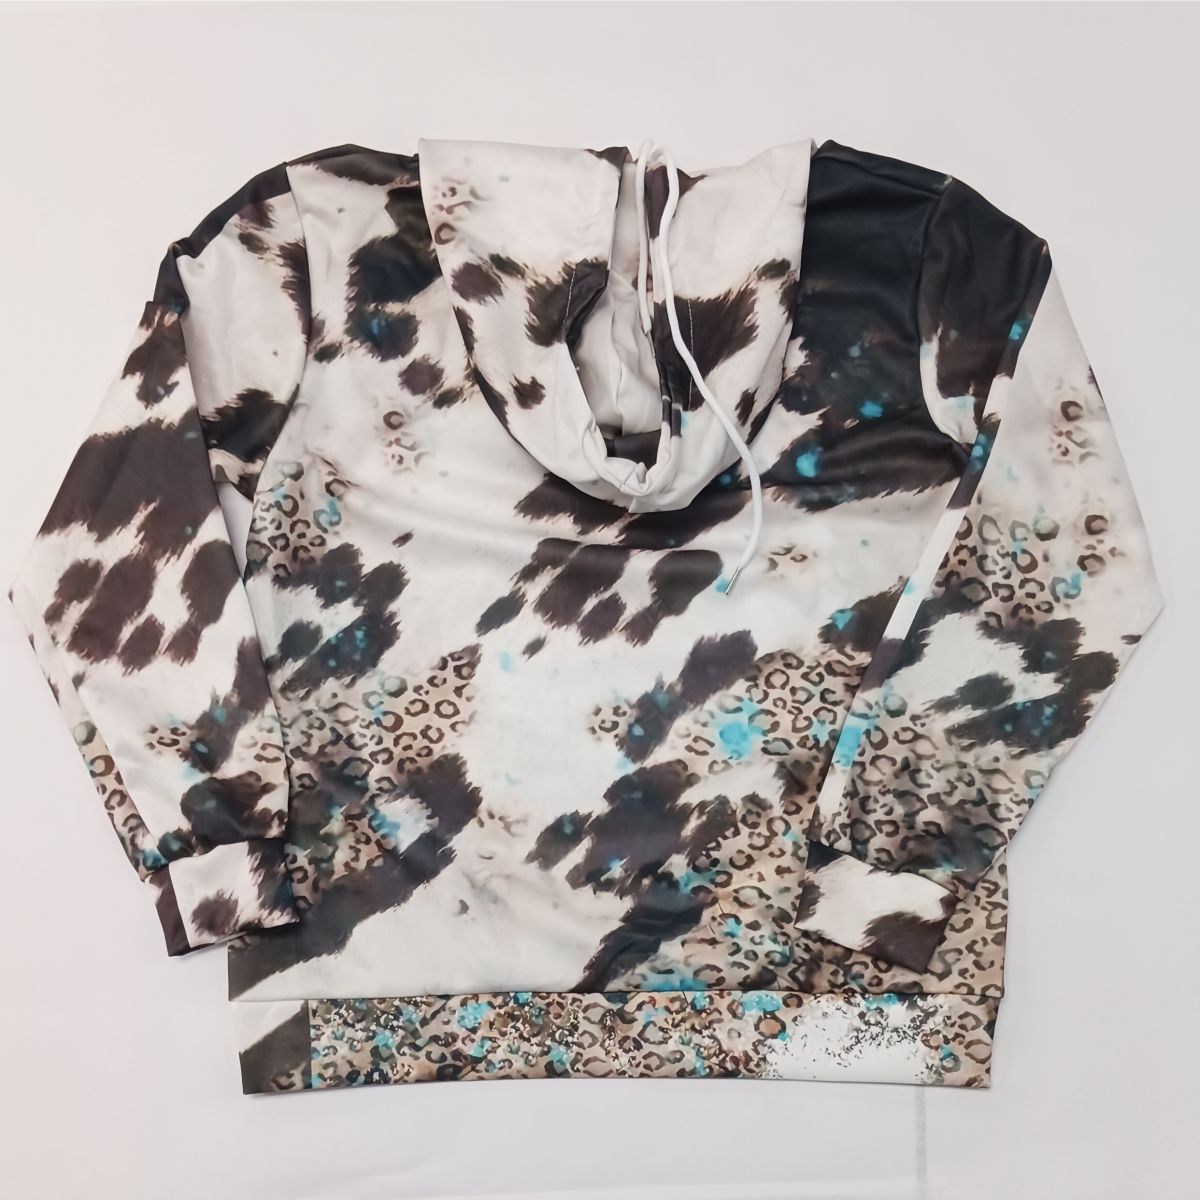 Sublimation 100% Polyester Sweatshirt Maroon Leopard Sublimation Hoodie Ready to Ship Send RTS Team Sublimation Fall New Maroon Sublimation